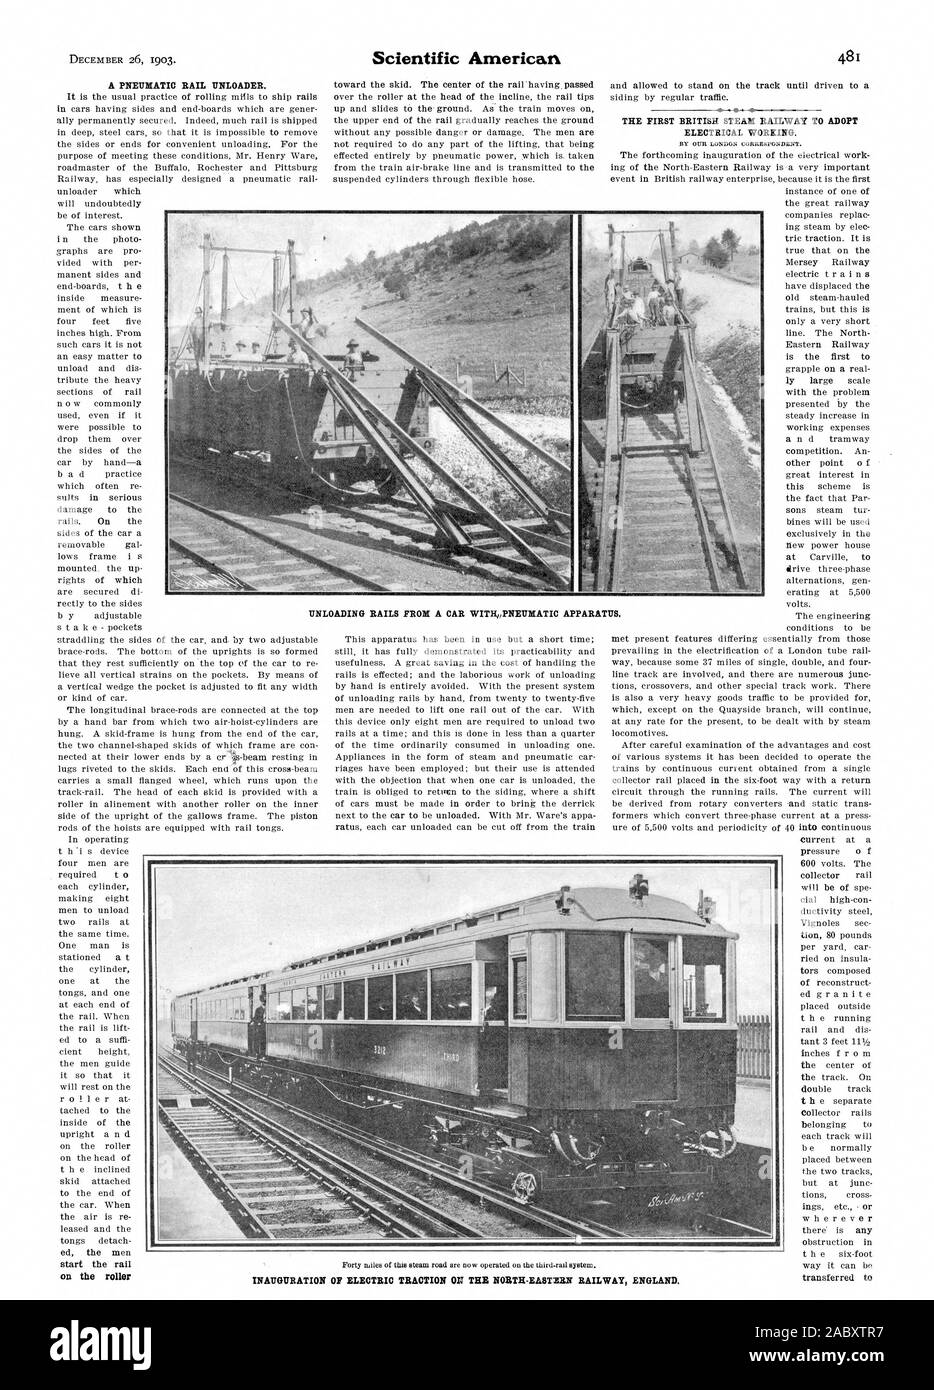 A PNEUMATIC RAIL UNLOADER. on the roller INAUGURATION OF ELECTRIC TRACTION ON THE NORTH-EASTERN RAILWAY ENGLAND UNLOADING RAILS FROM A CAR WITHPNEUMATIC APPARATUS. THE FIRST BRITISH STEAM RAILWAY TO ADOPT ELECTRICAL WORKING., scientific american, 1903-12-26 Stock Photo